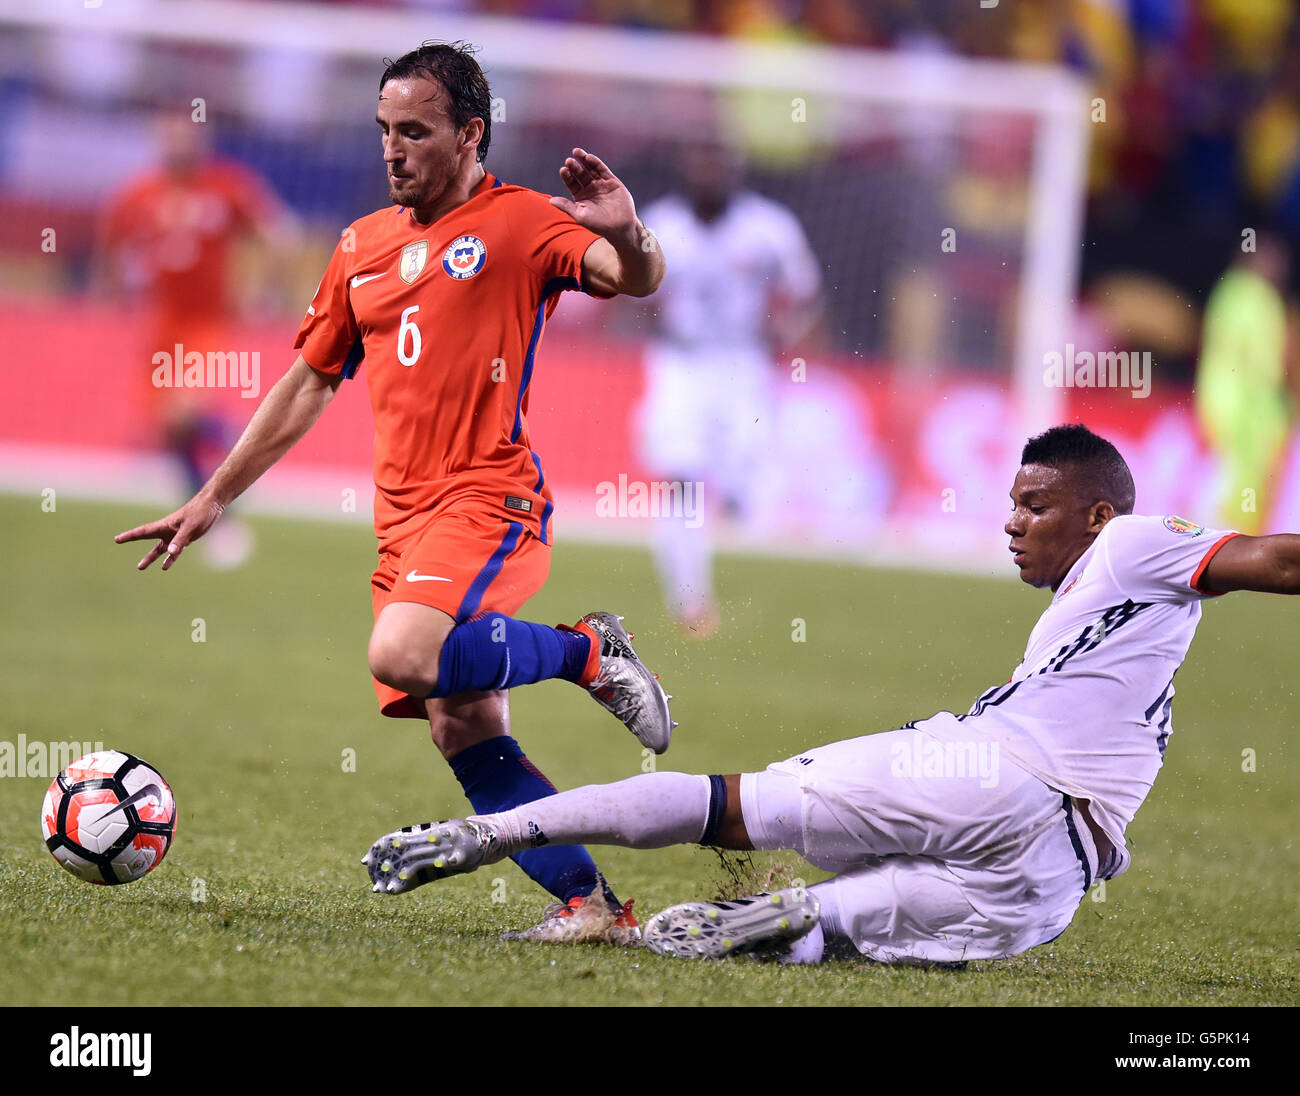 Chicago, USA. 22nd June, 2016. Chile's Jose Pedro Fuenzalida (L) competes during the Copa America Centenario semifinal football match aginst Colombia in Chicago, Illinois, the United States, on June 22, 2016. Chile won 2-0. Credit:  Bao Dandan/Xinhua/Alamy Live News Stock Photo